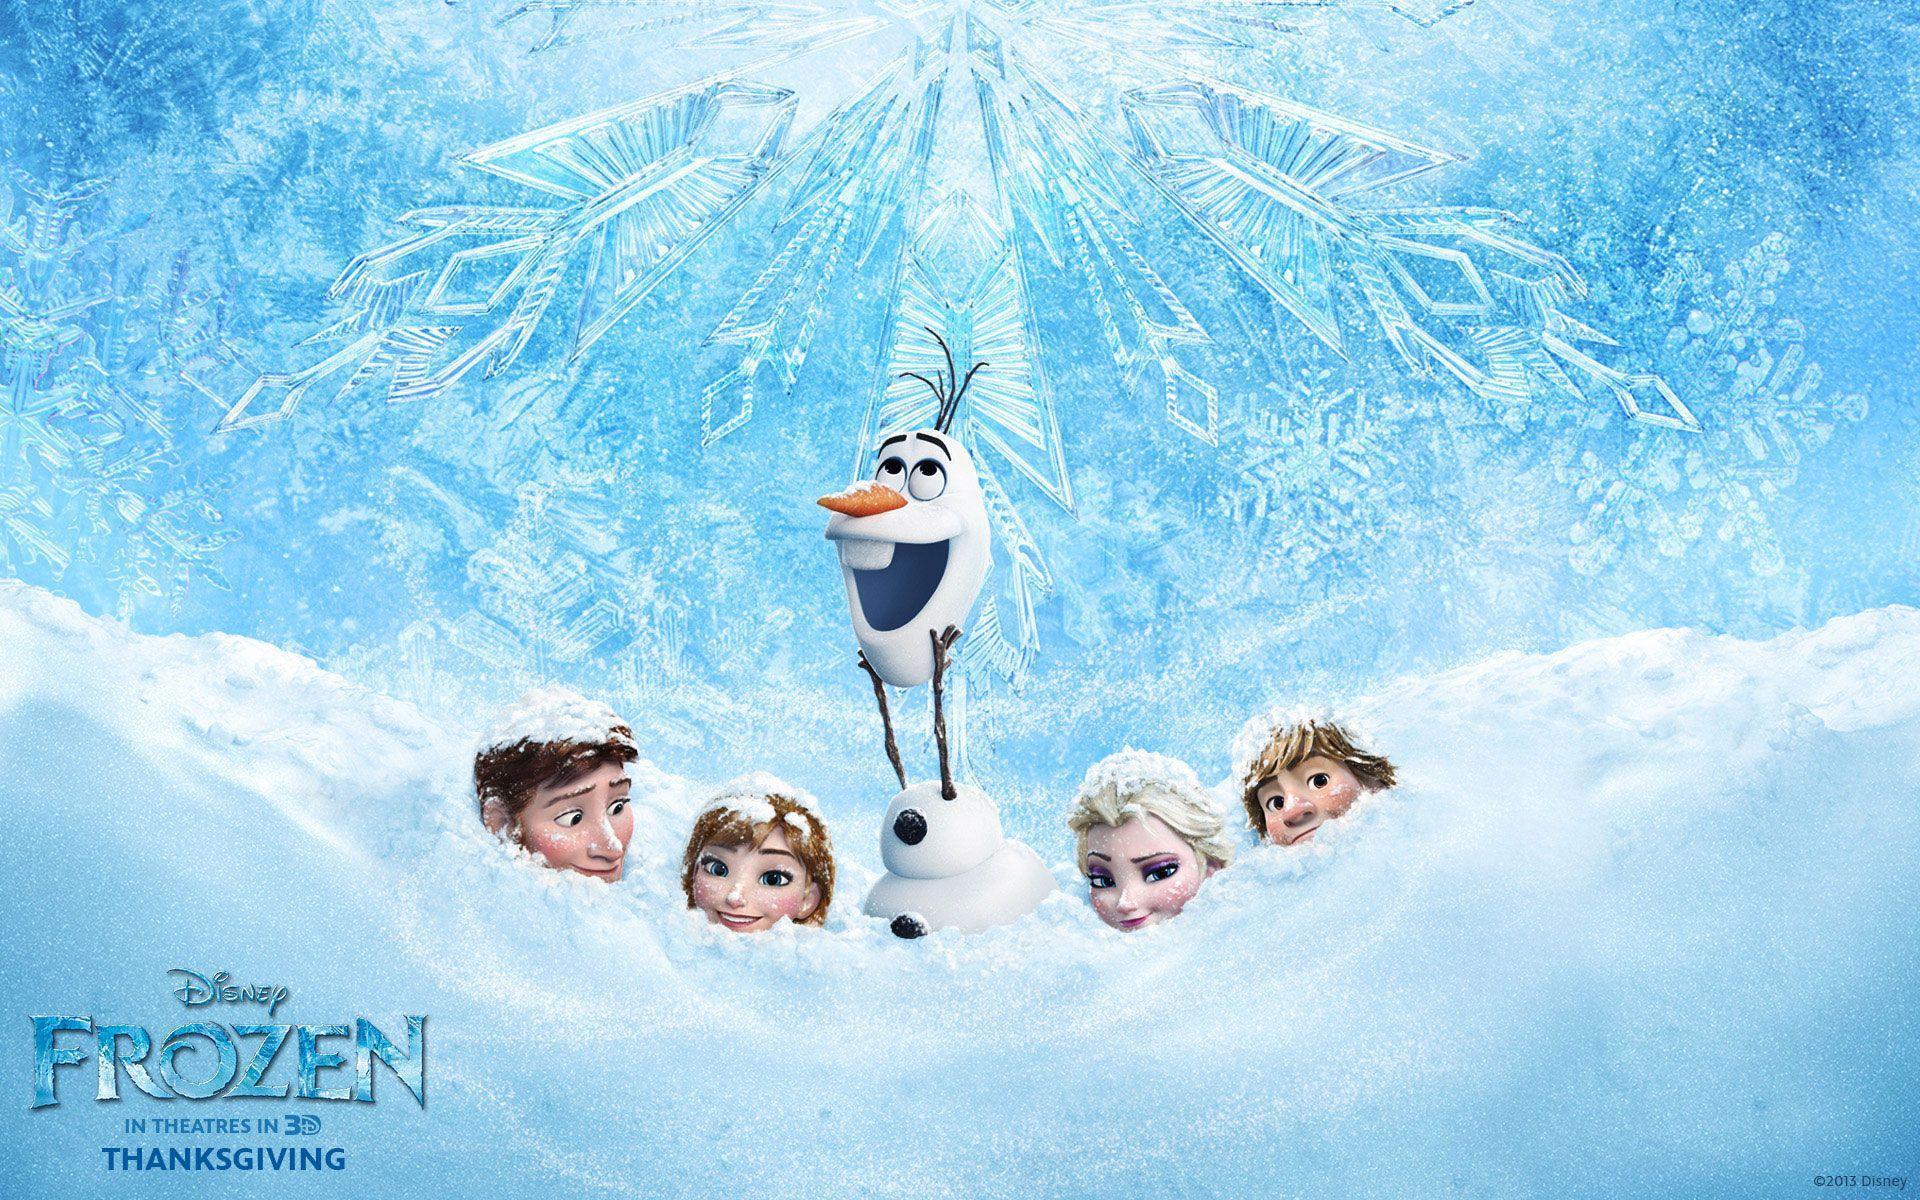 Frozen Movie Wallpapers 2K & Facebook Timeline Covers